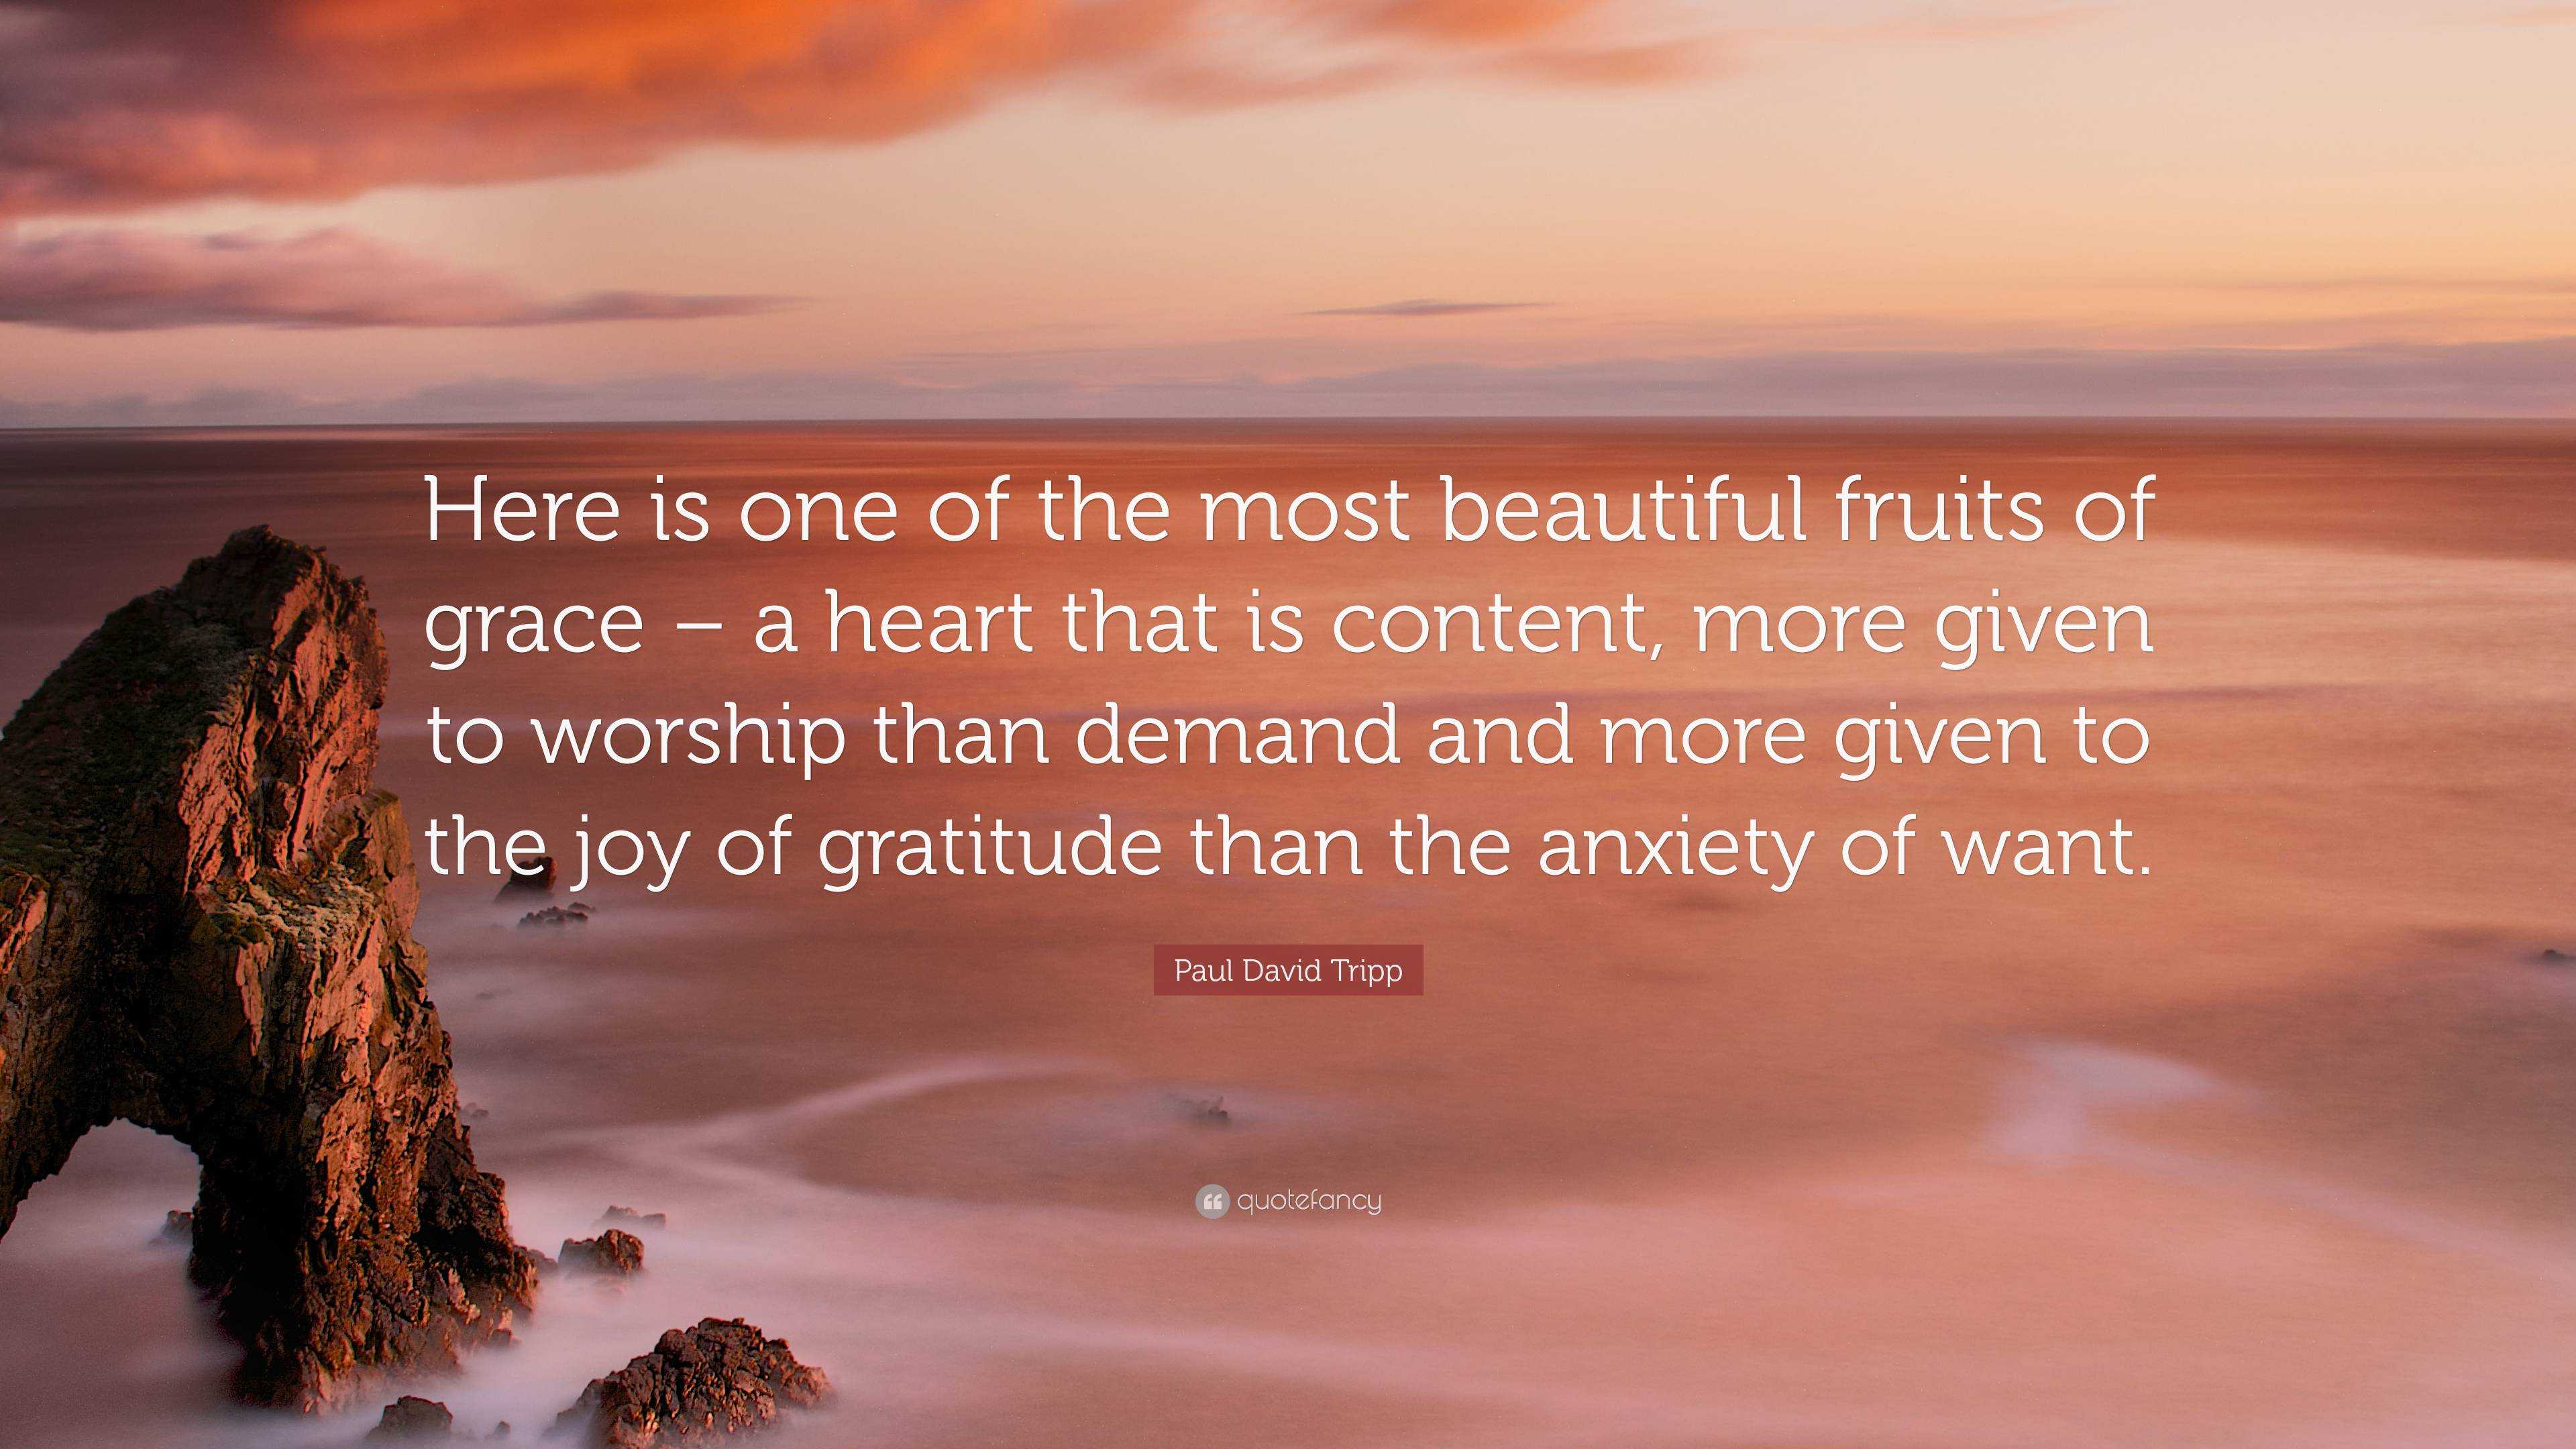 Paul David Tripp Quote: “Here is one of the most beautiful fruits of grace  – a heart that is content, more given to worship than demand and more ...”